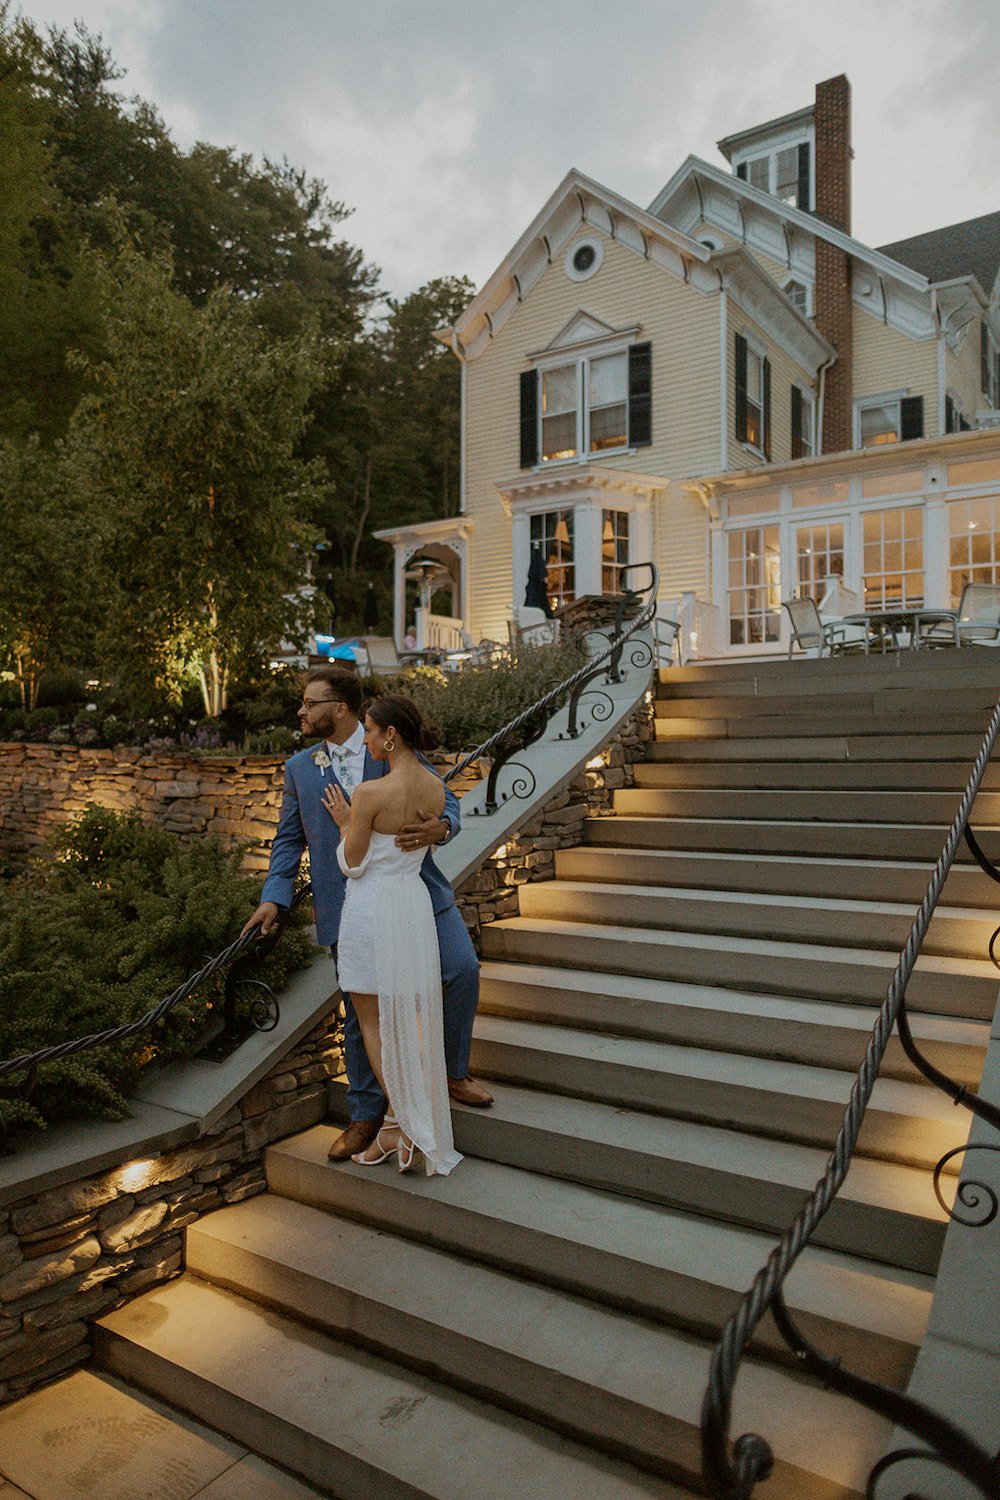 Bride and groom stand together on stairs looking out at the lakeside view during blue hour.